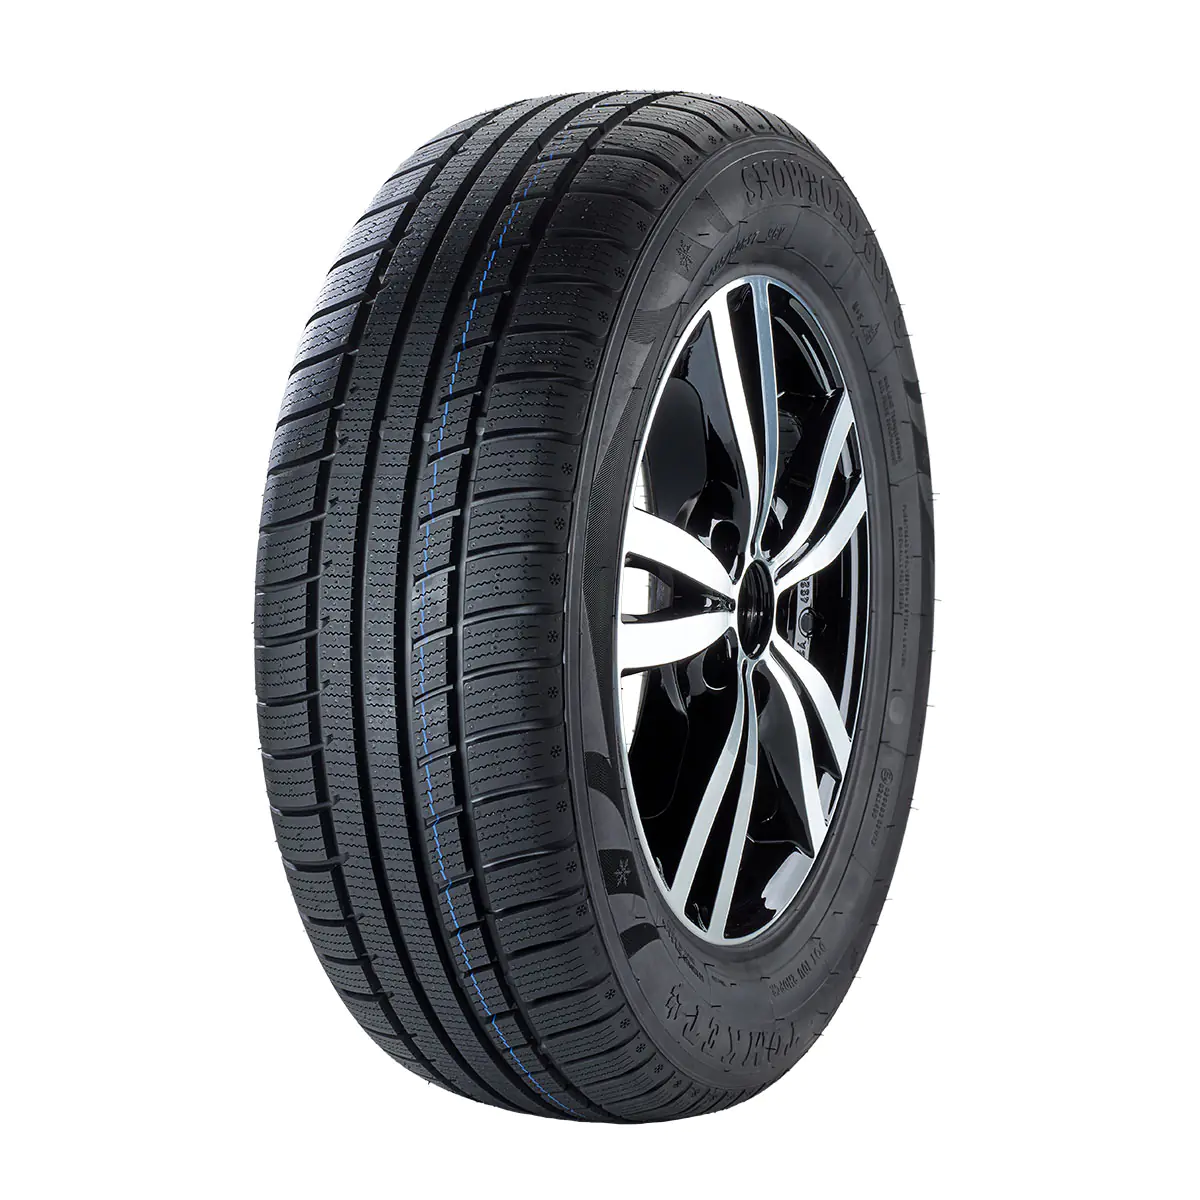 Gomme 4x4 Suv Tomket 215/70 R16 100H SNOWROAD SUV 3 M+S Invernale